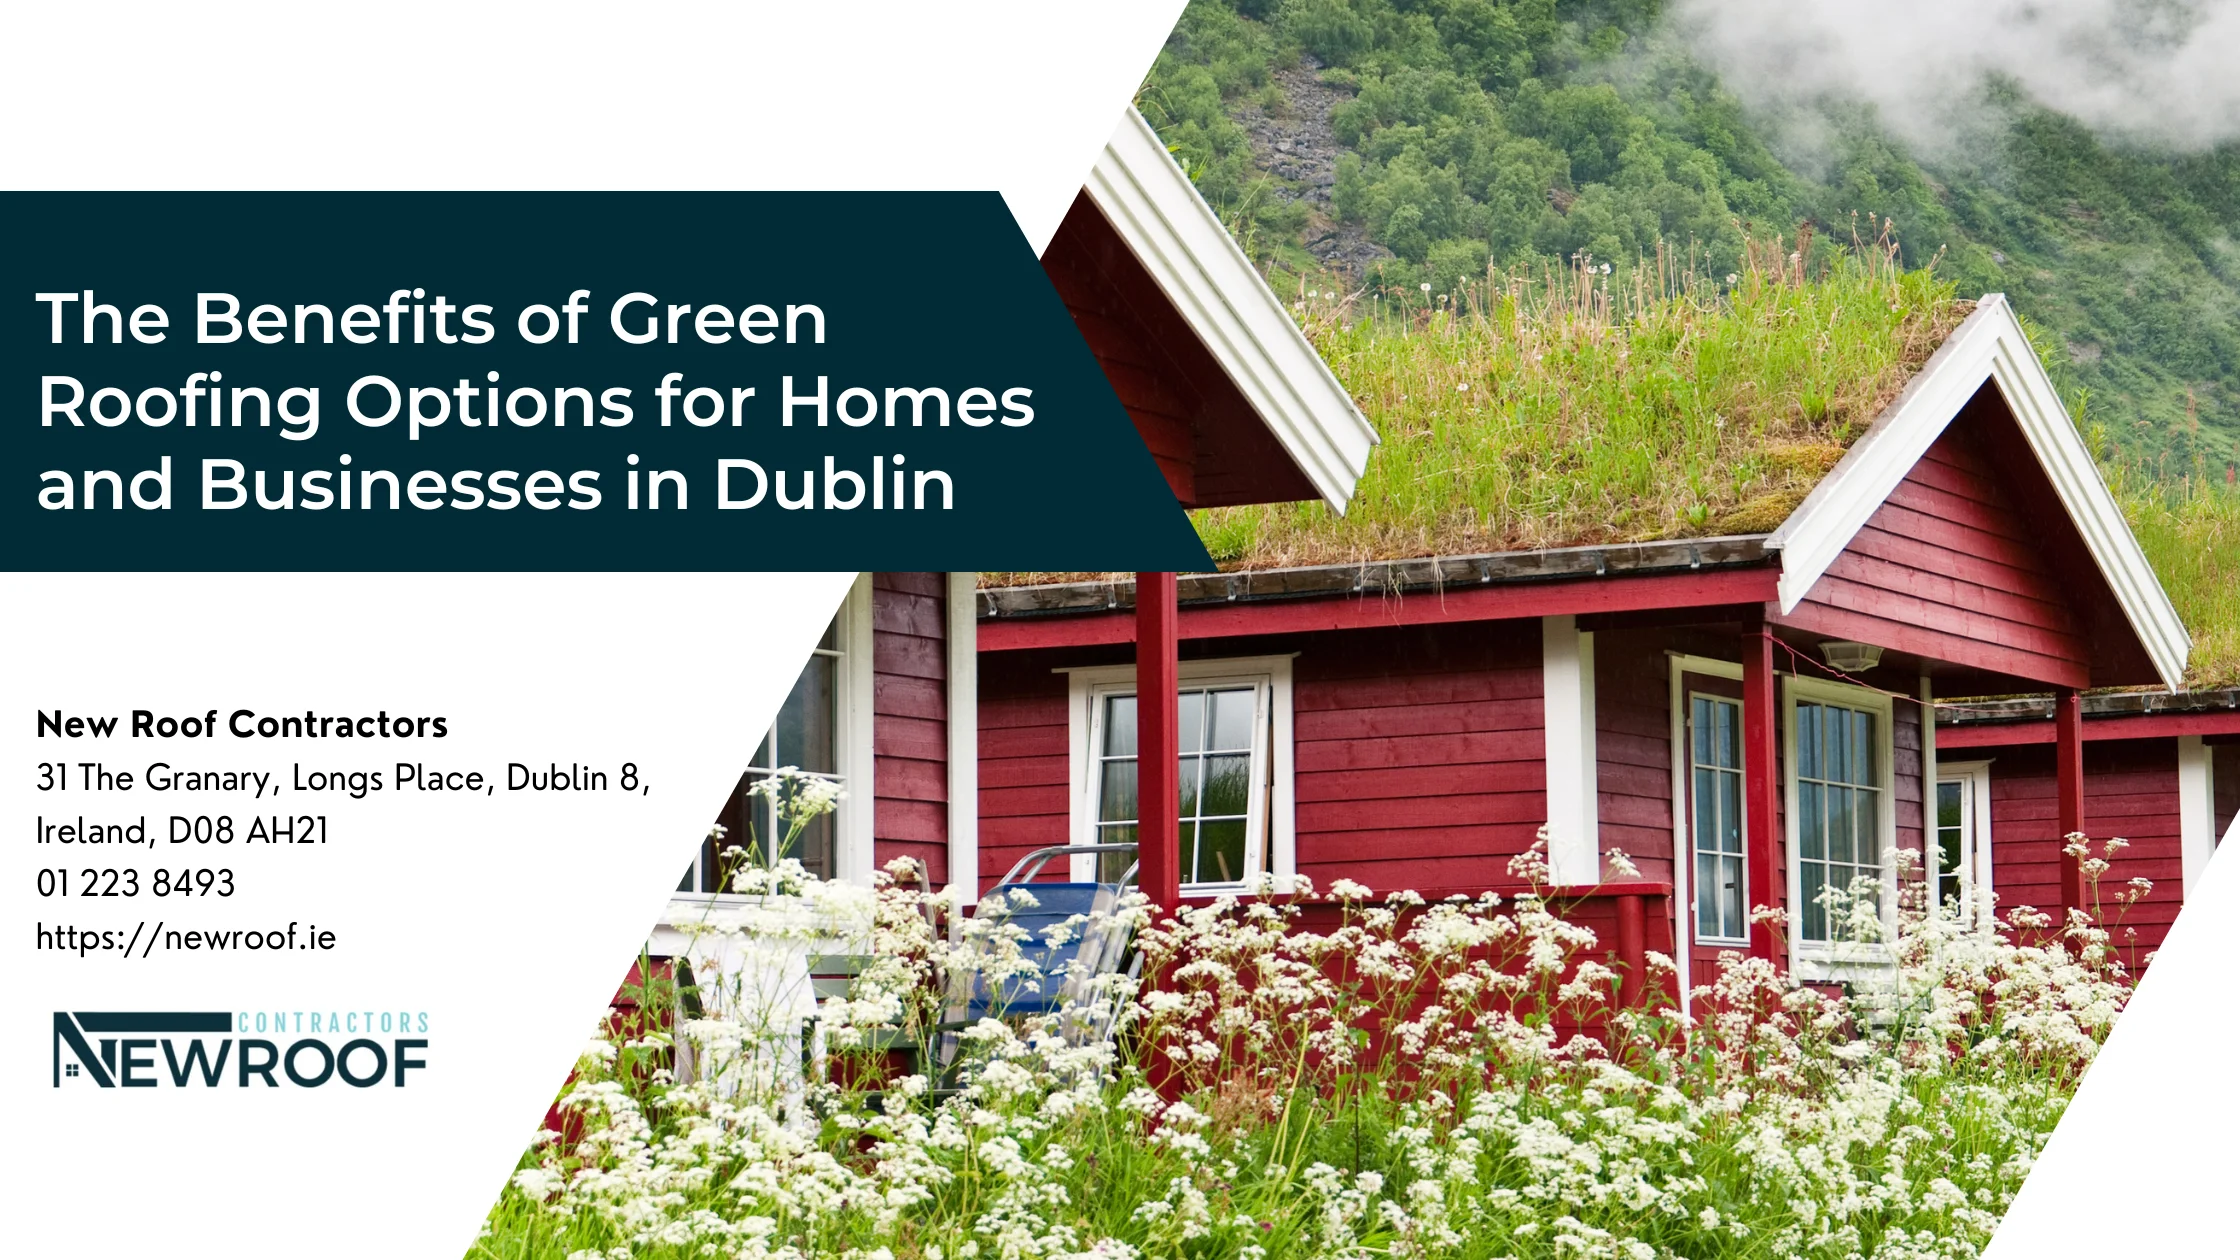 The Benefits of Green Roofing Options for Homes